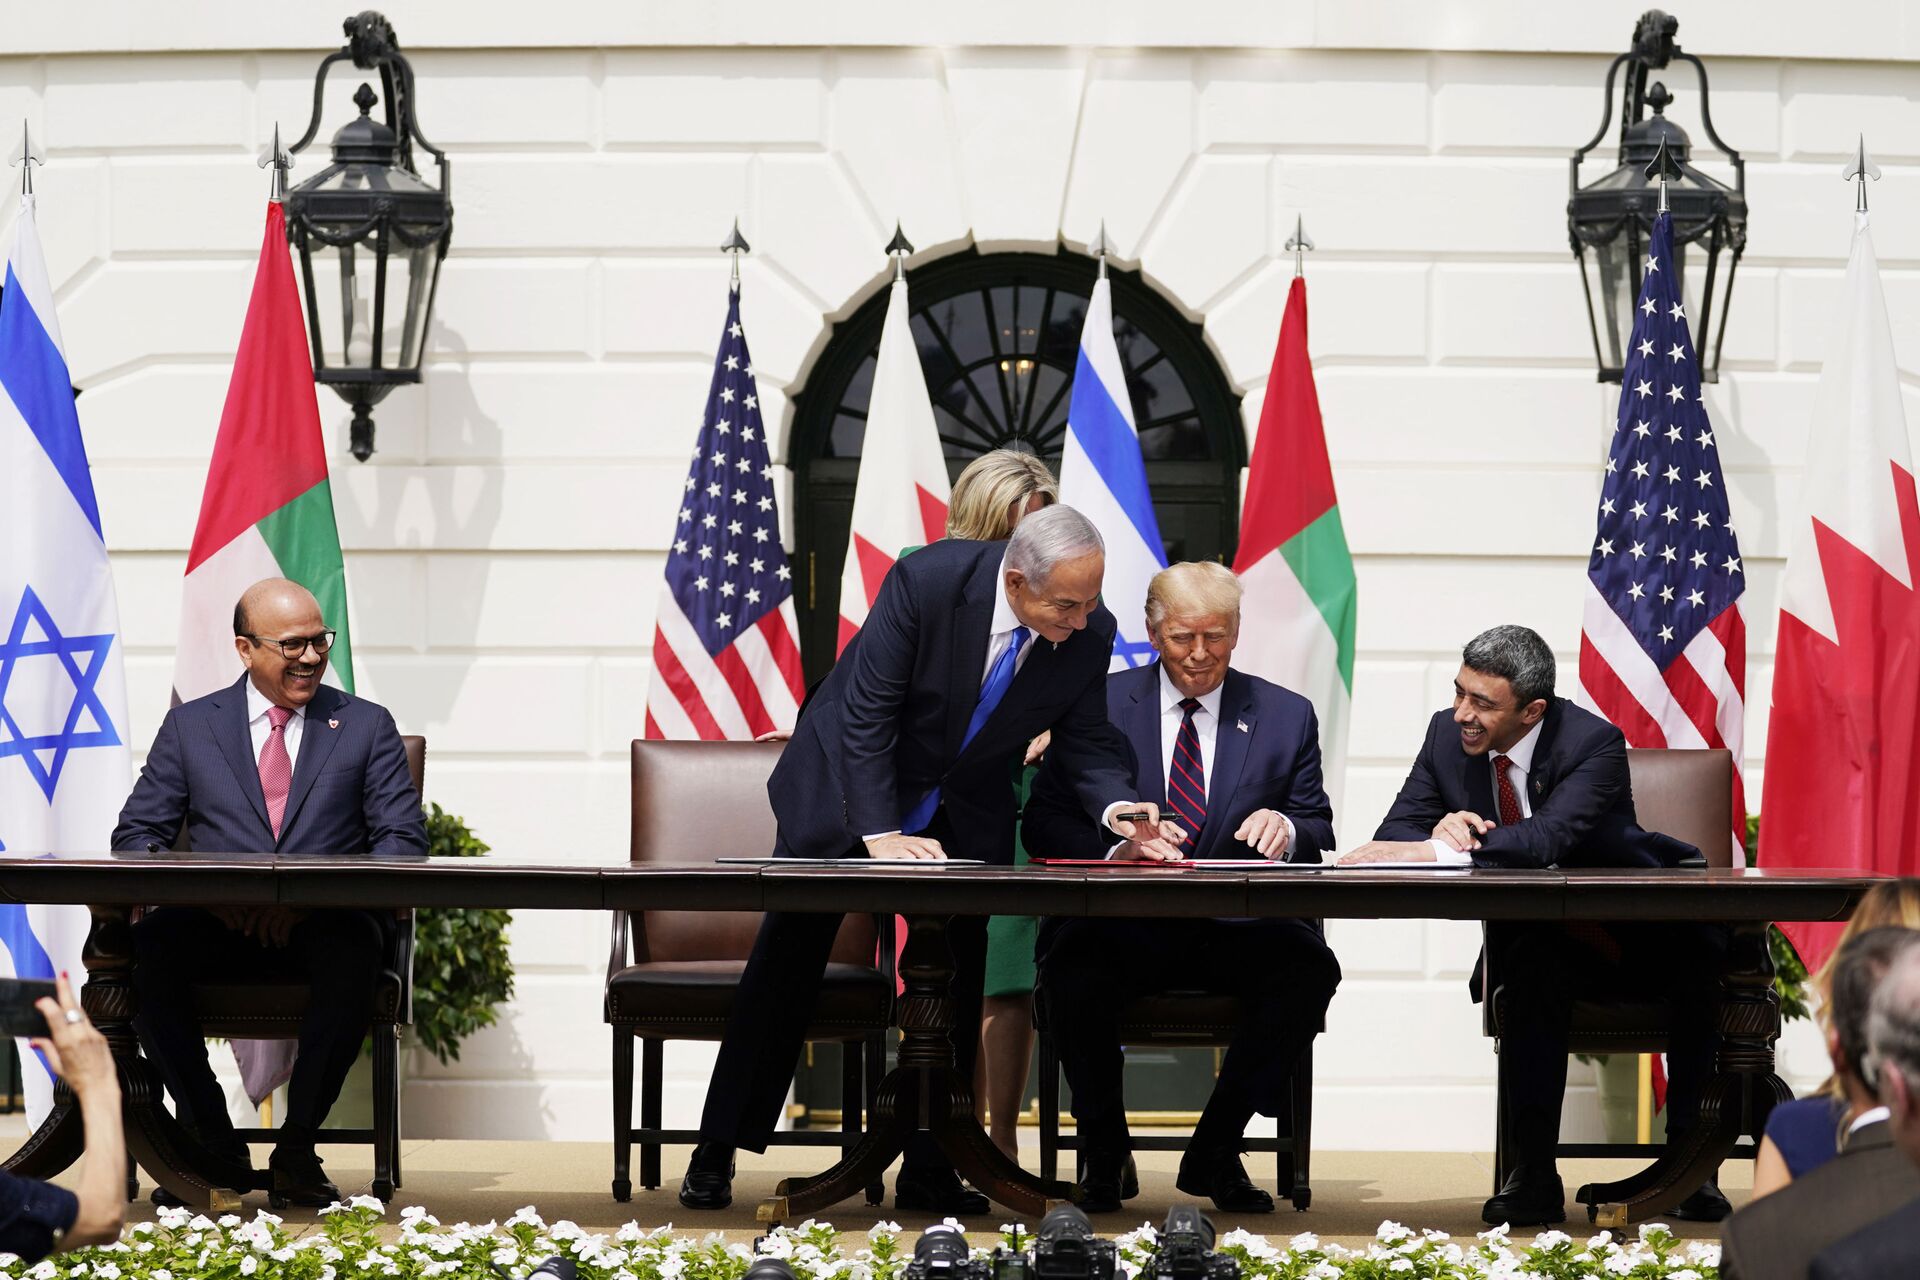 President Donald Trump, center, with from left, Bahrain Foreign Minister Khalid bin Ahmed Al Khalifa, Israeli Prime Minister Benjamin Netanyahu, Trump, and United Arab Emirates Foreign Minister Abdullah bin Zayed al-Nahyan, during the Abraham Accords signing ceremony on the South Lawn of the White House, Tuesday, Sept. 15, 2020, in Washington. (AP Photo/Alex Brandon) - Sputnik International, 1920, 17.09.2021